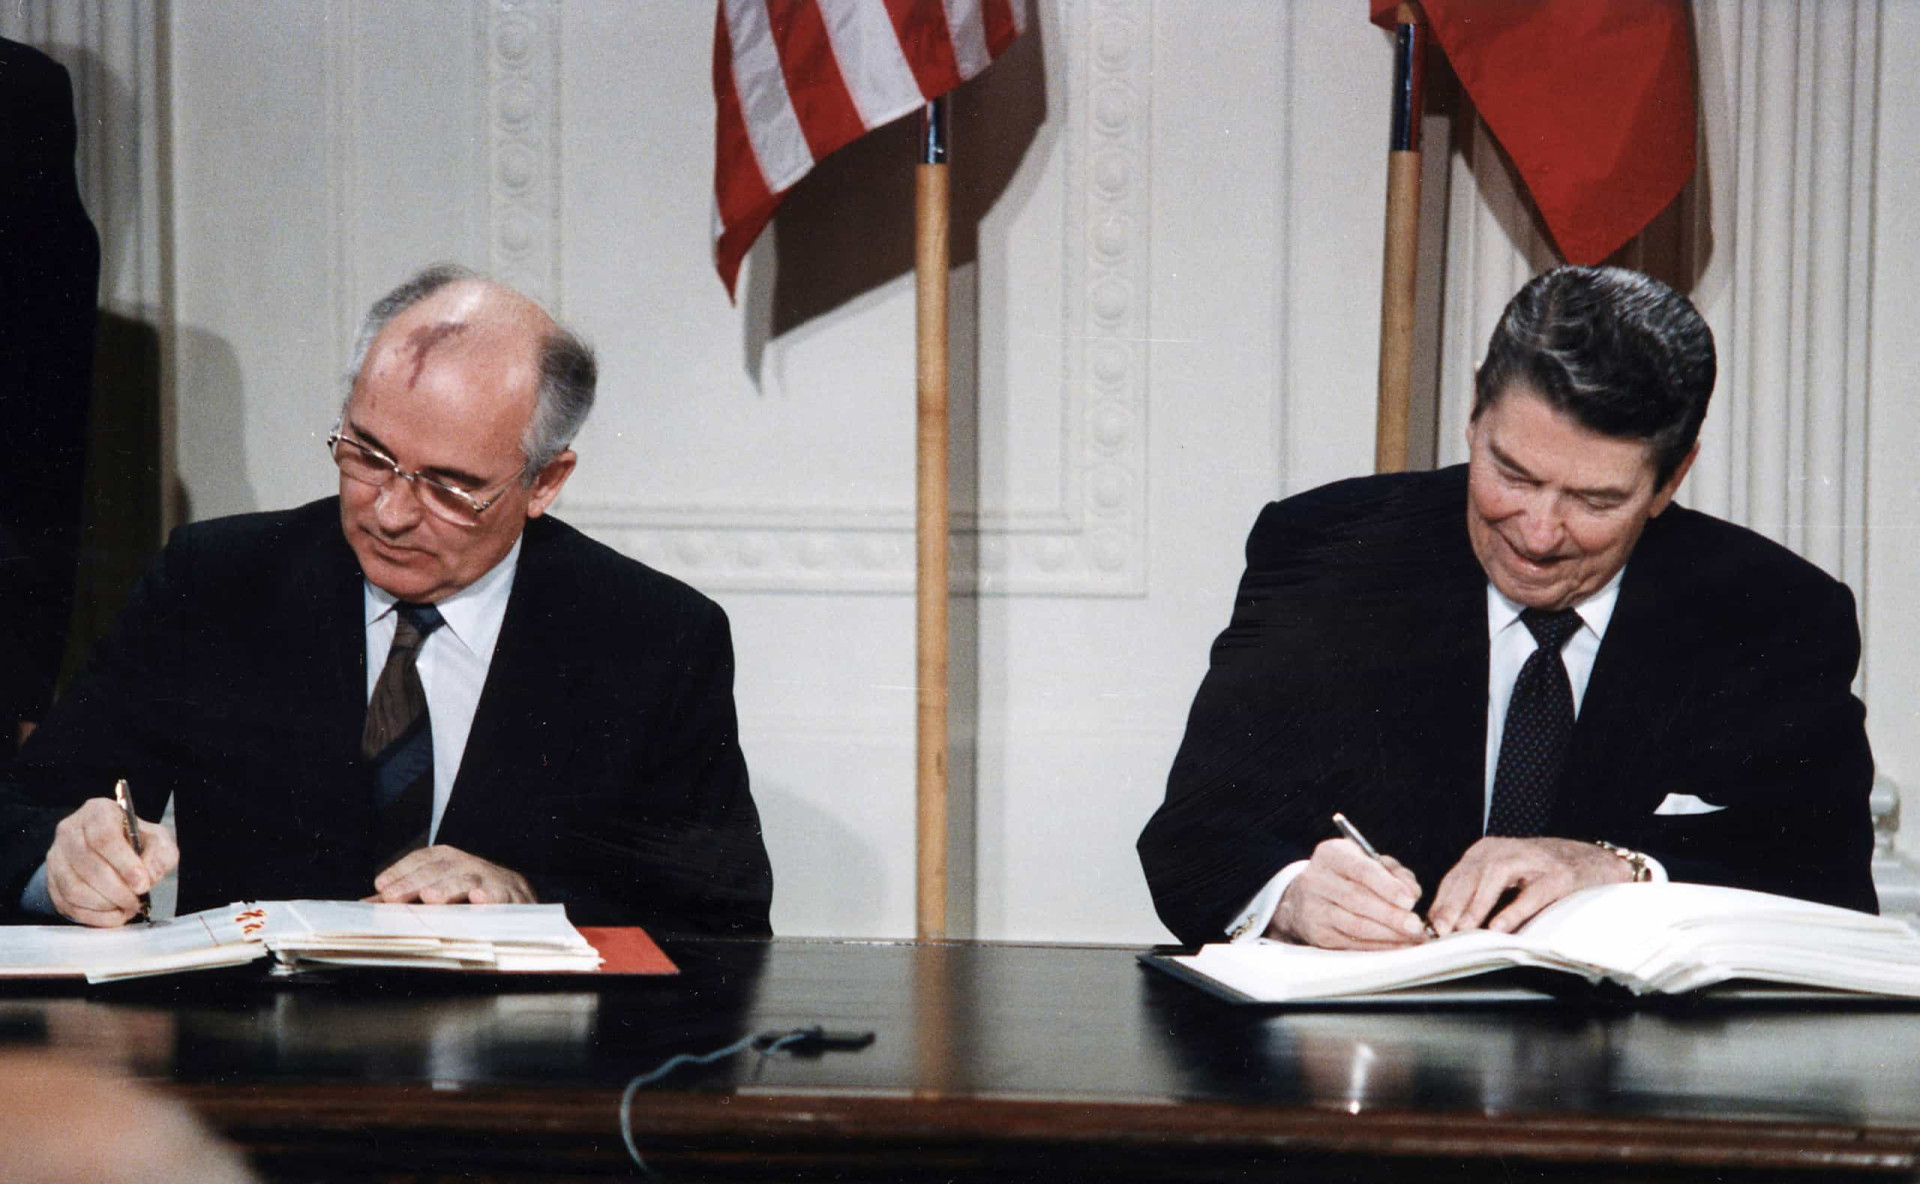 <p>A thaw in the Cold War sees the clock gain three minutes as Ronald Reagan and Mikhail Gorbachev sign the Intermediate-Range Nuclear Forces Treaty in Washington, D.C. on December 8, 1987, effective June 1, 1988.</p><p>You may also like:<a href="https://www.starsinsider.com/n/399001?utm_source=msn.com&utm_medium=display&utm_campaign=referral_description&utm_content=490923v3en-us"> Facts about the world's most-hated jobs </a></p>